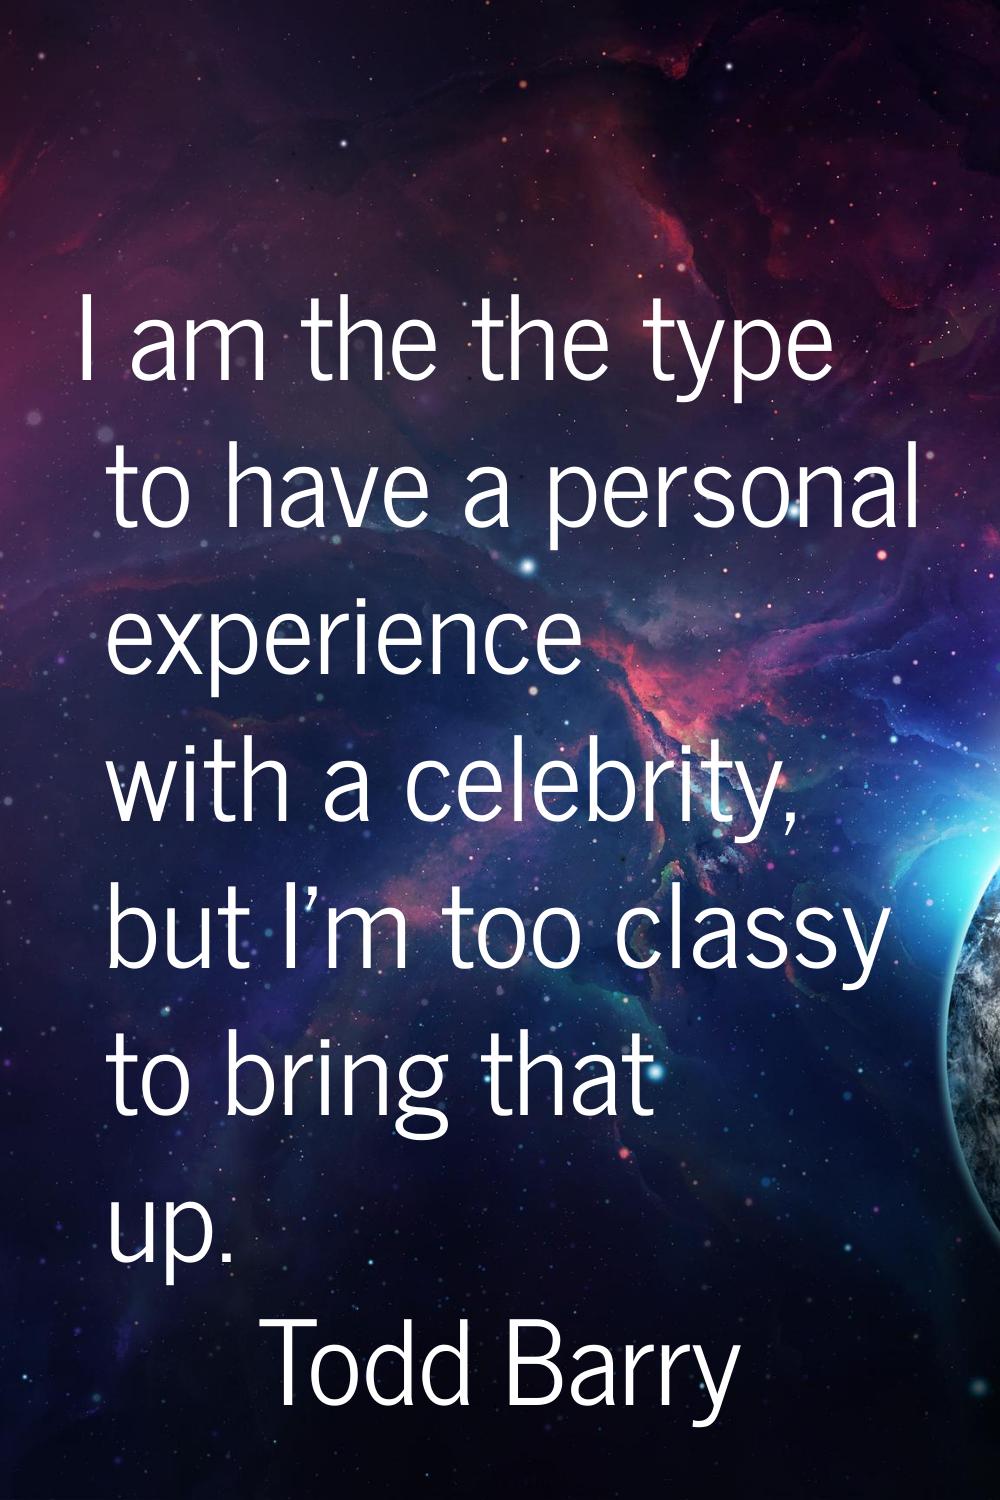 I am the the type to have a personal experience with a celebrity, but I'm too classy to bring that 